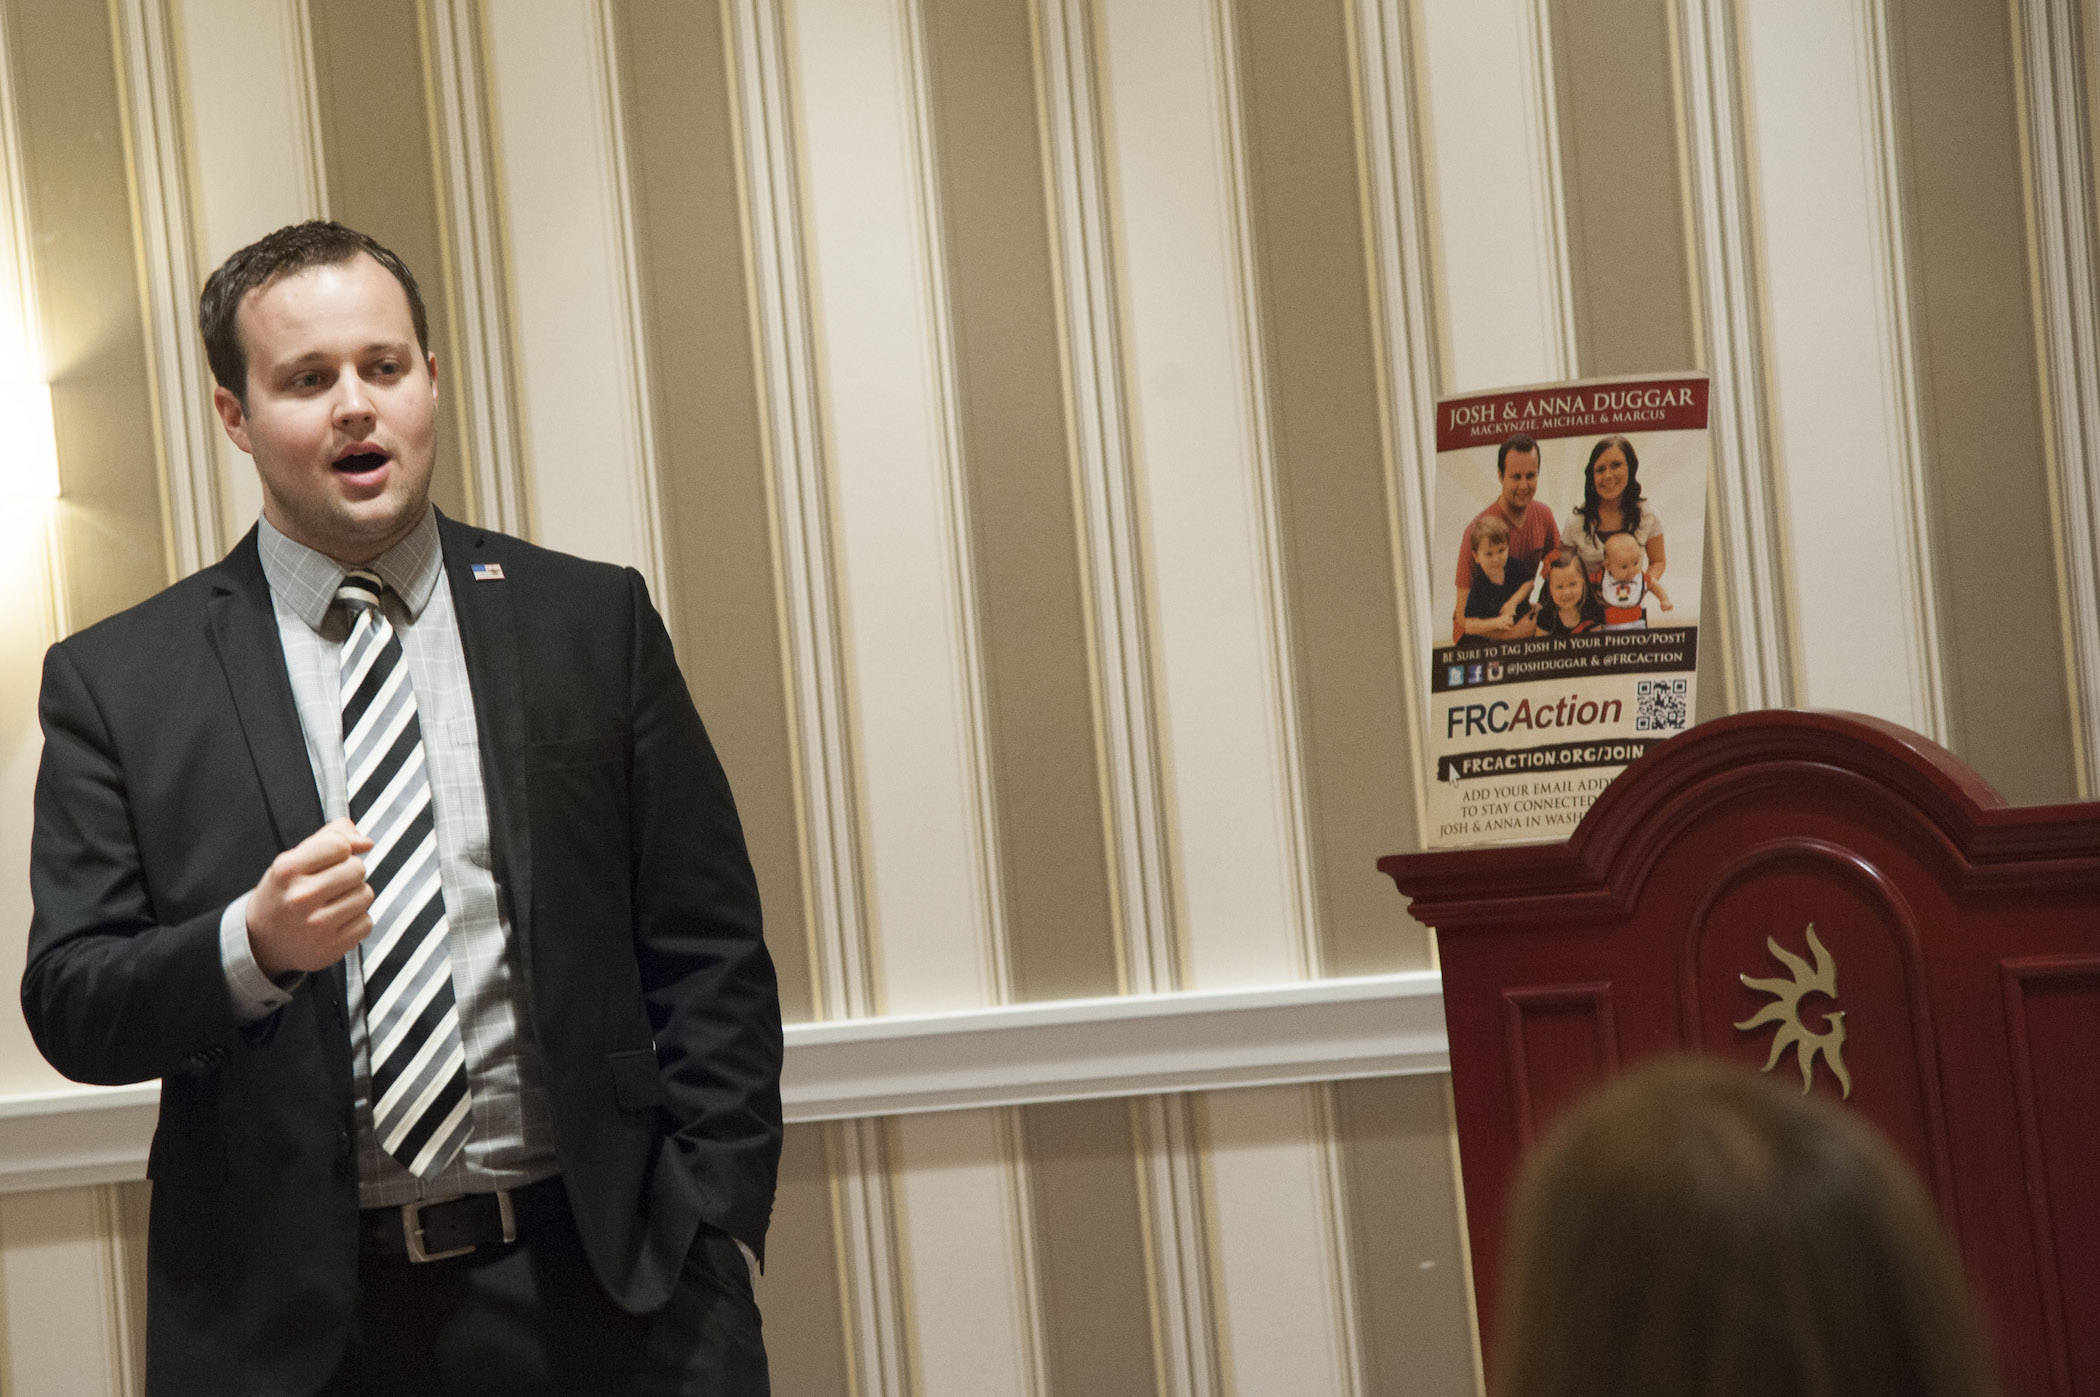 Josh Duggar of the Duggar family in a suit talking in a room